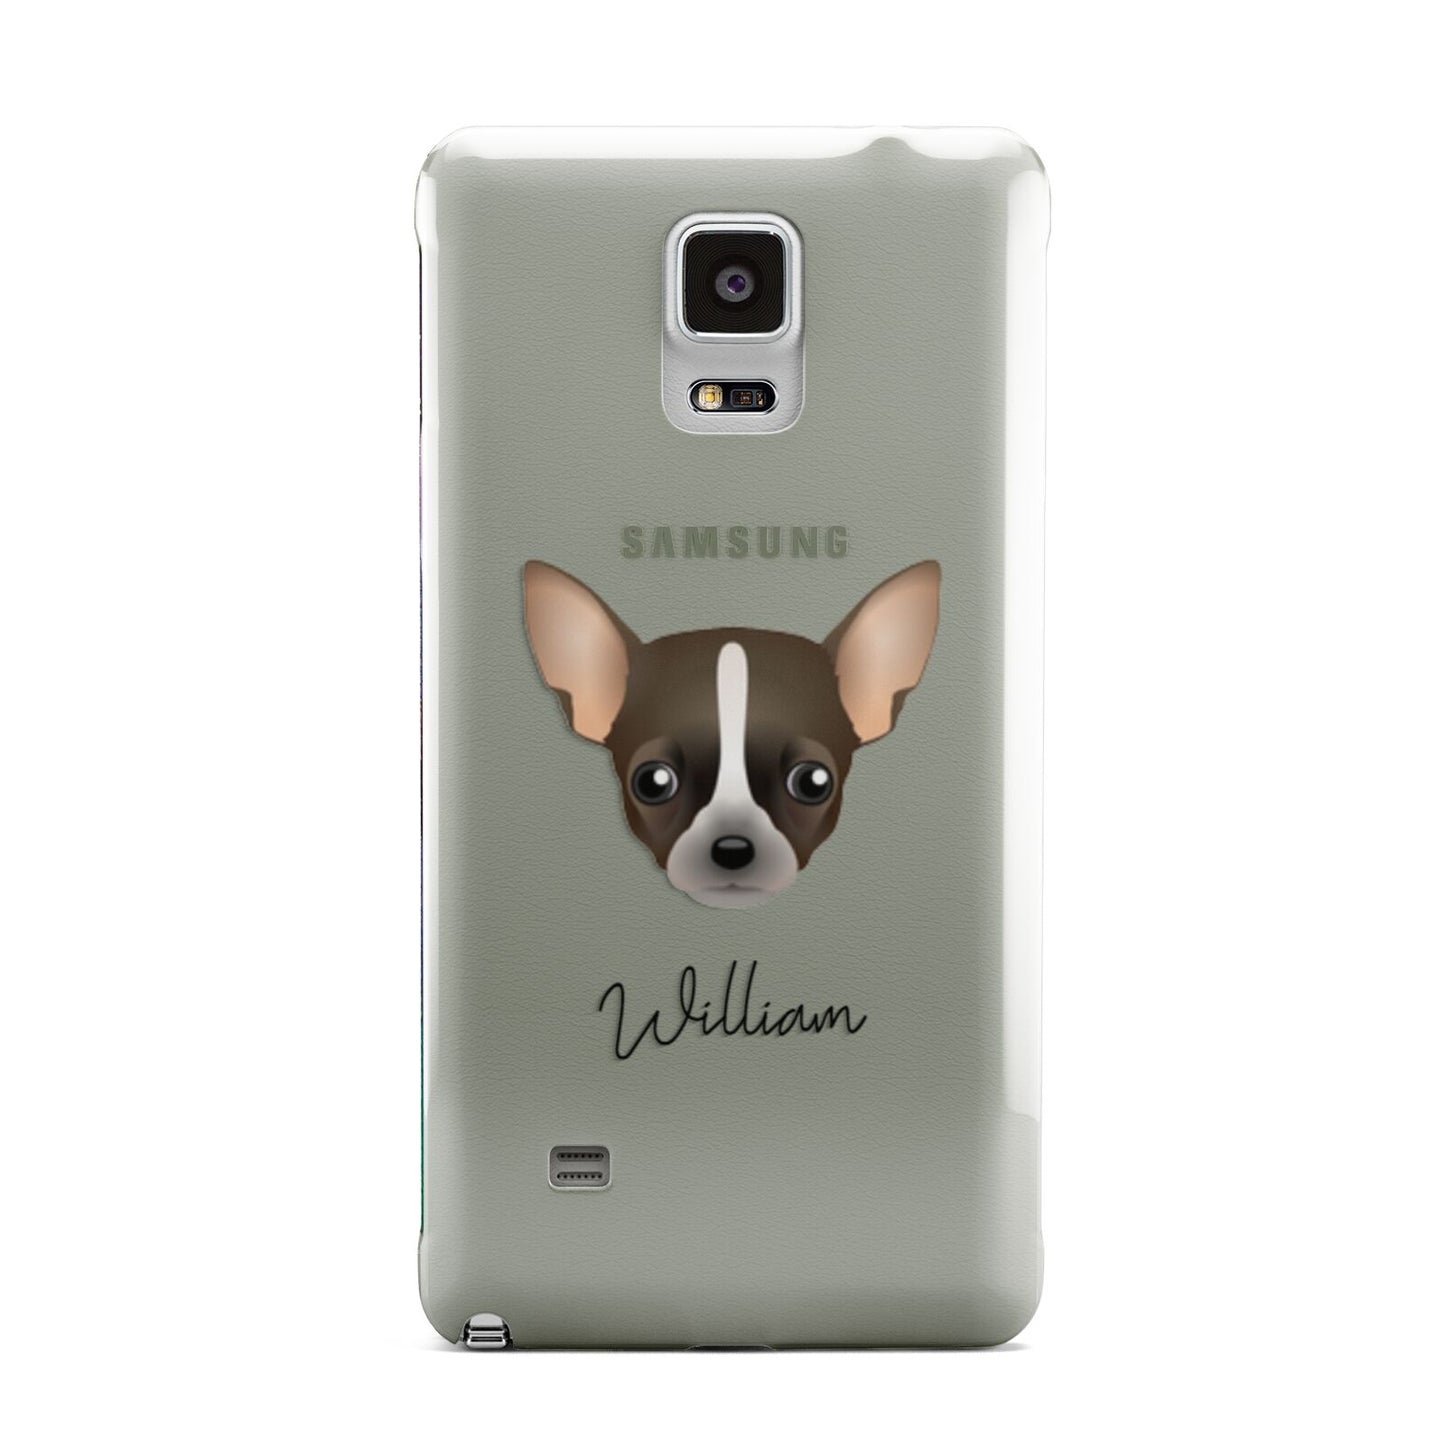 Chihuahua Personalised Samsung Galaxy Note 4 Case